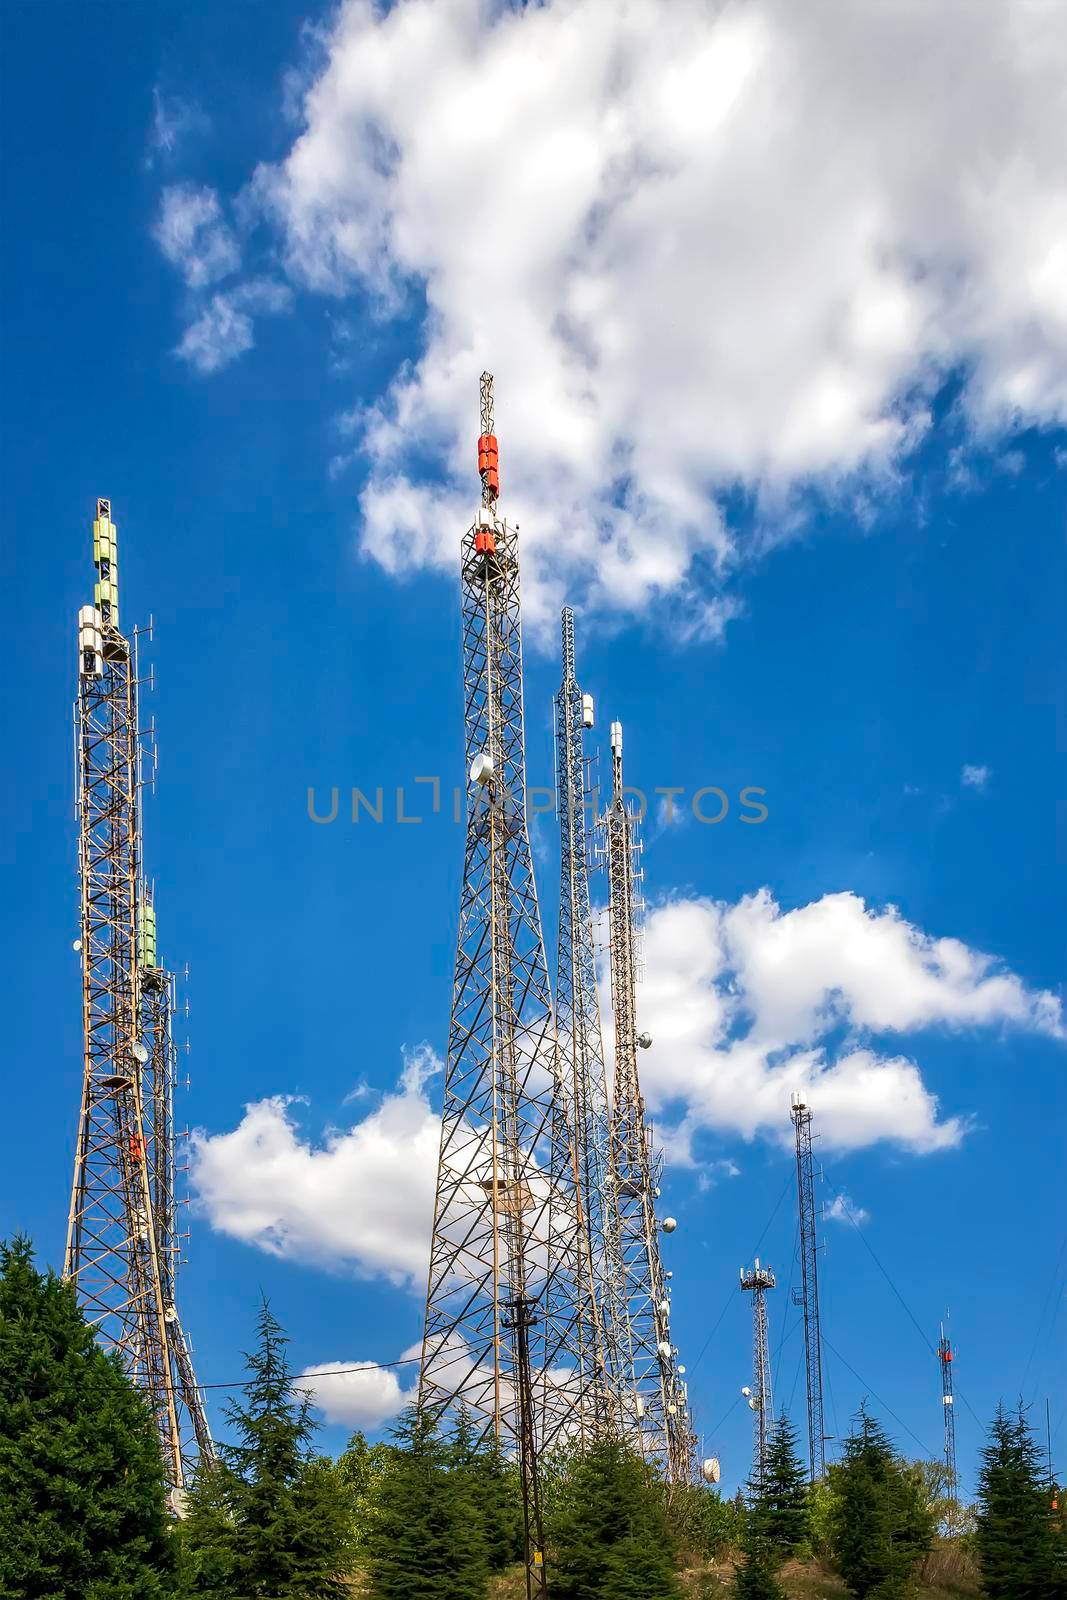 communication towers with control devices and antennas, transmitters and repeaters for mobile communications  by EdVal